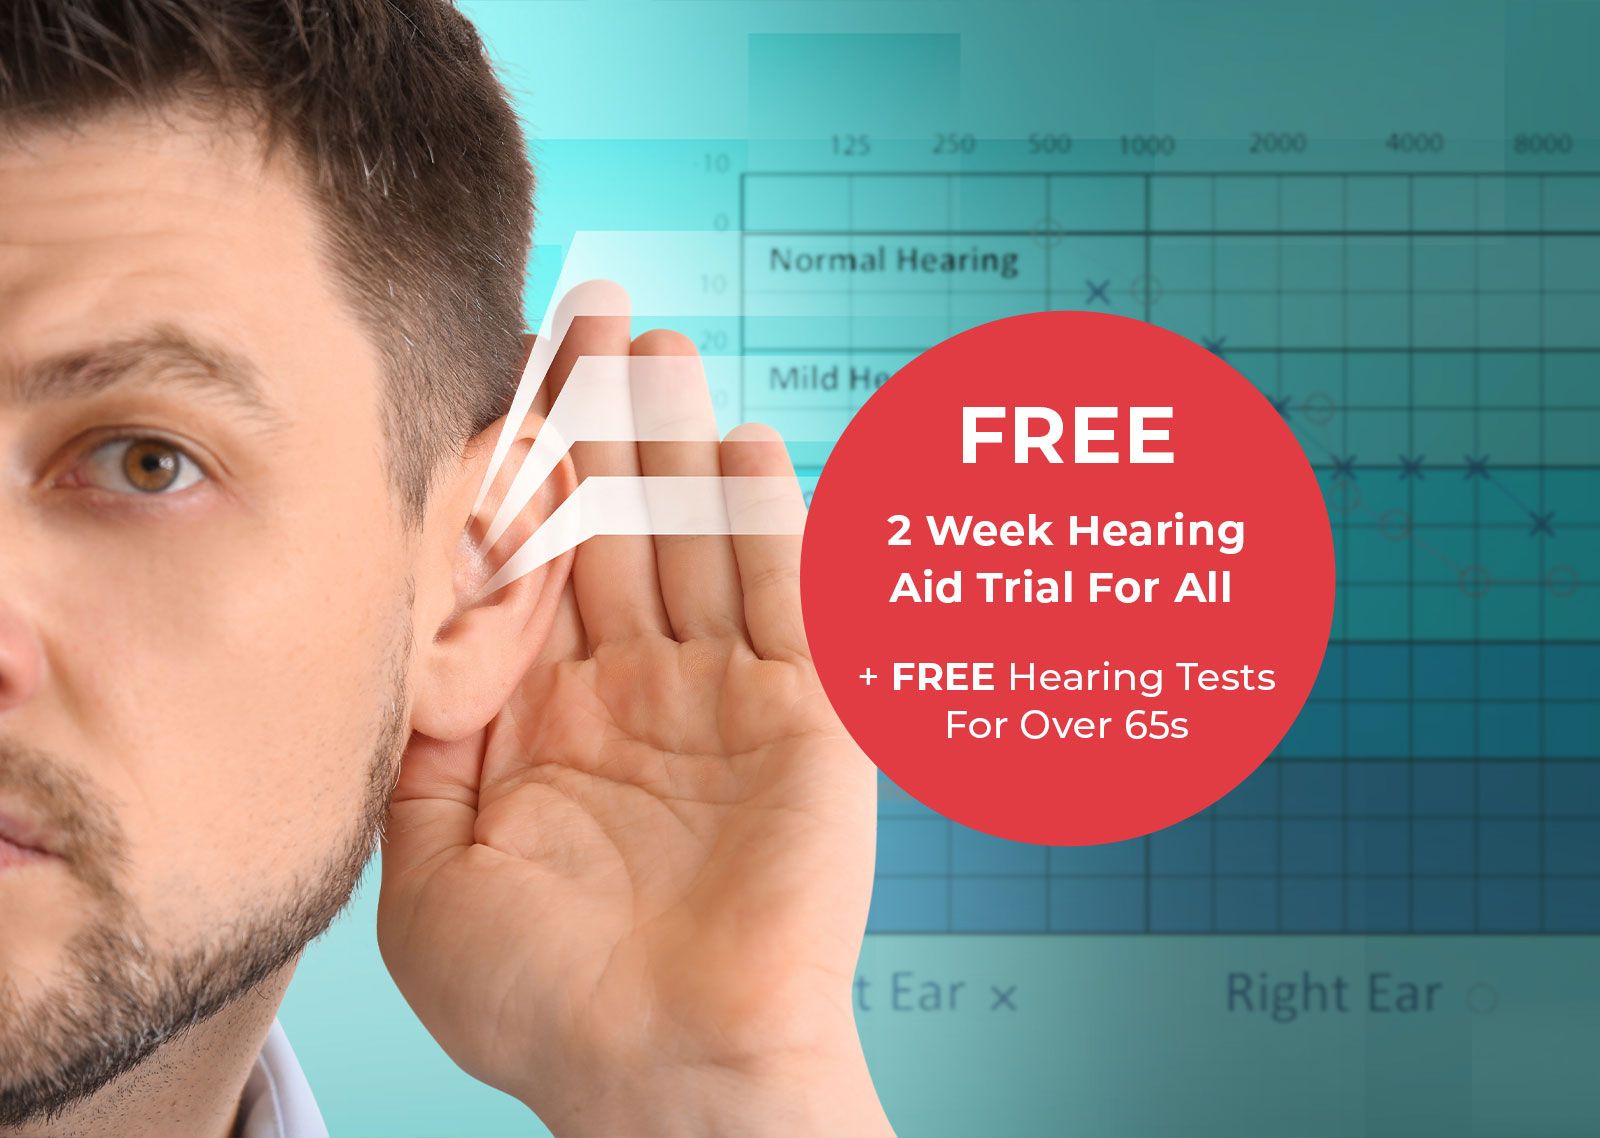 Struggling to Hear? We can help. Home Hearing Tests Also Available.